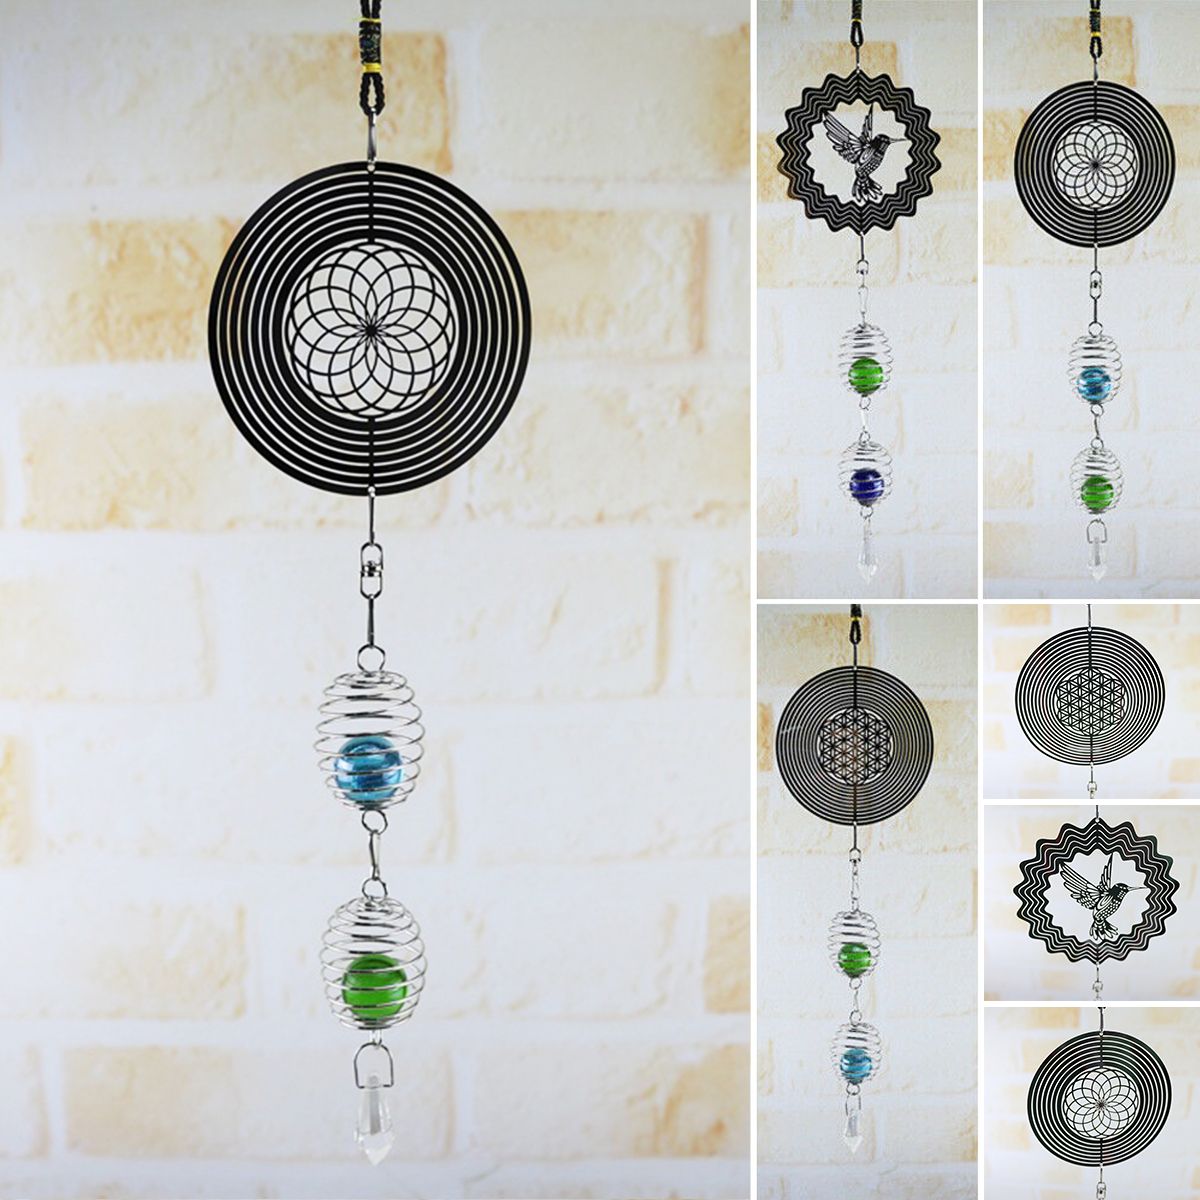 Home-Wind-Chime-Hanging-Ornament-Spinner-Spiral-Rotating-Crystal-Ball-Yard-Decor-1682681